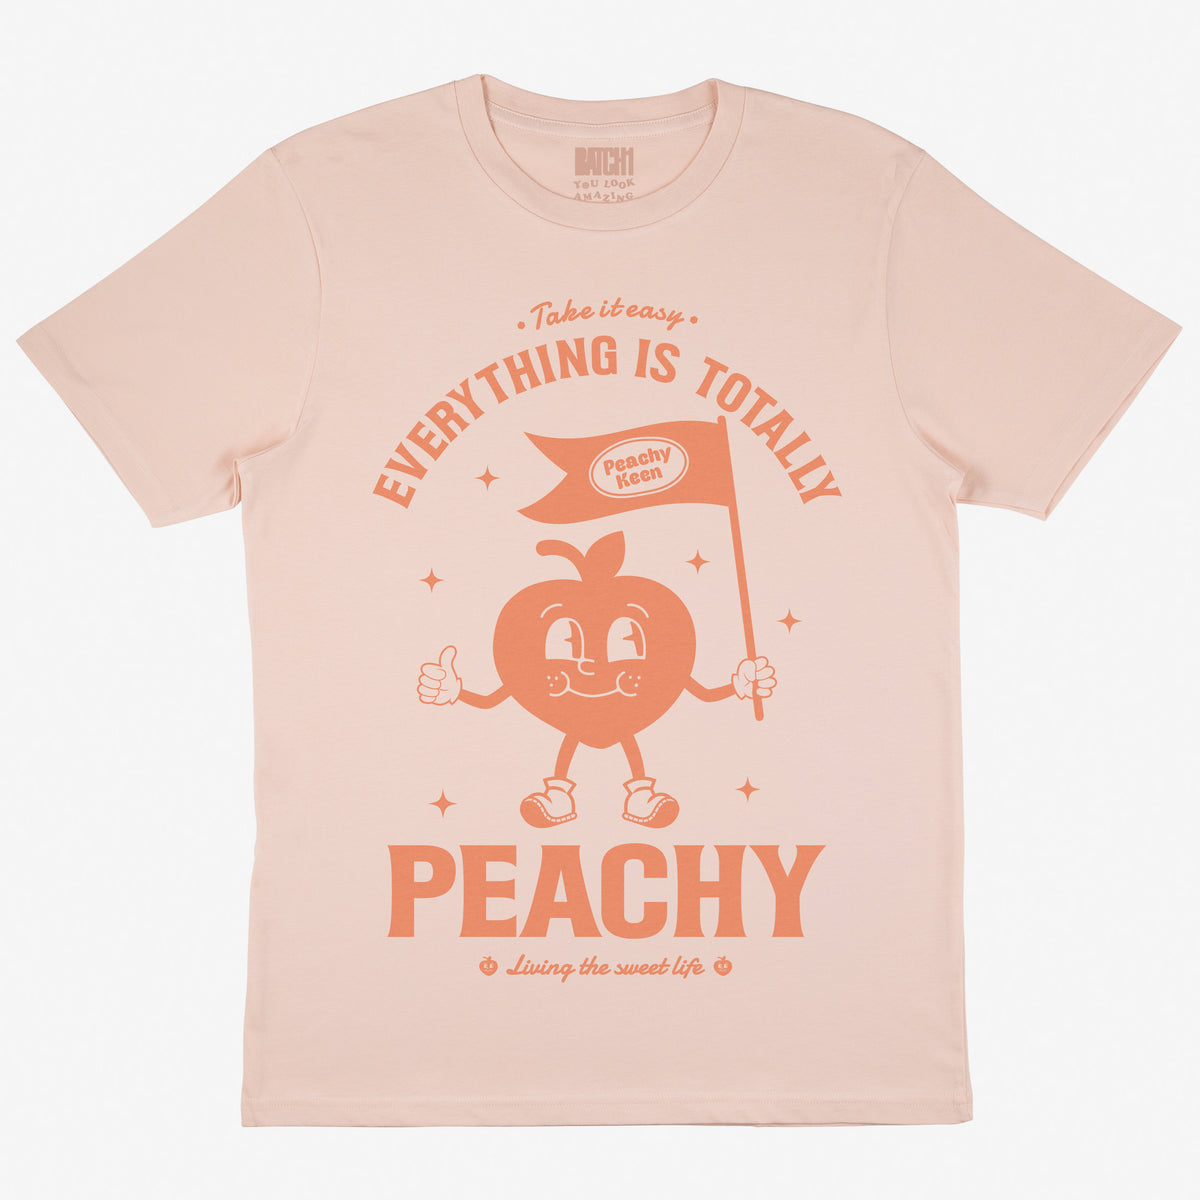 Boobs and Oversized Shirts- The Battle! - It's Peachy Keen